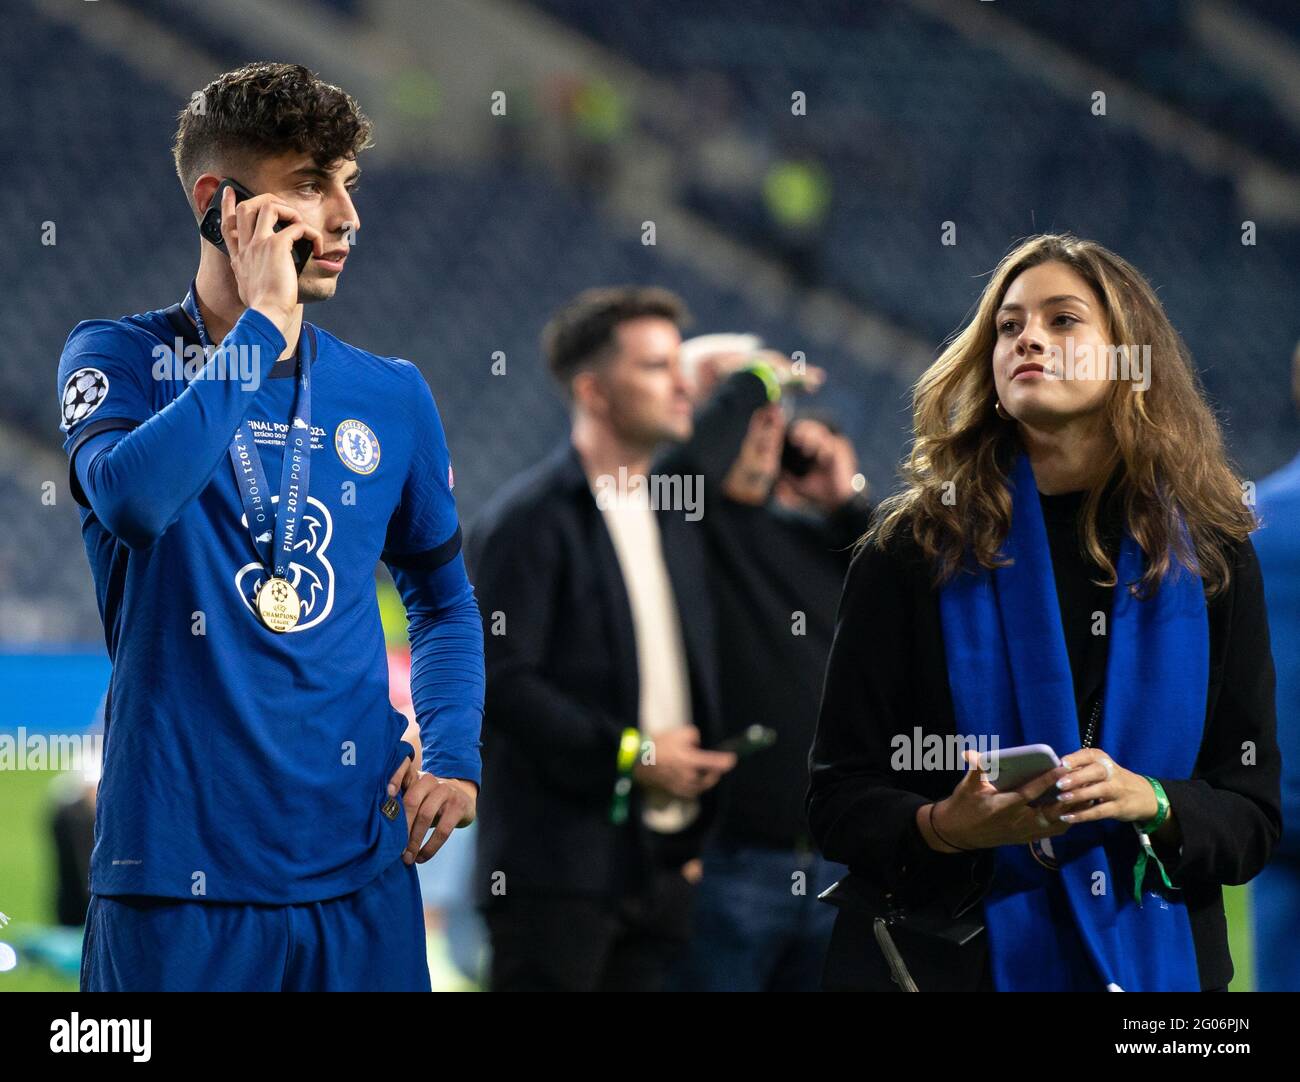 Ryal Quay, UK. 29th May, 2021. Kai Havertz of Chelsea celebrates with girlfriend Sophia Weber following the UEFA Champions League Final match between Manchester City and Chelsea at The Est‡dio do Drag‹o, Porto, Portugal on 29 May 2021. Photo by Andy Rowland. Credit: PRiME Media Images/Alamy Live News Stock Photo